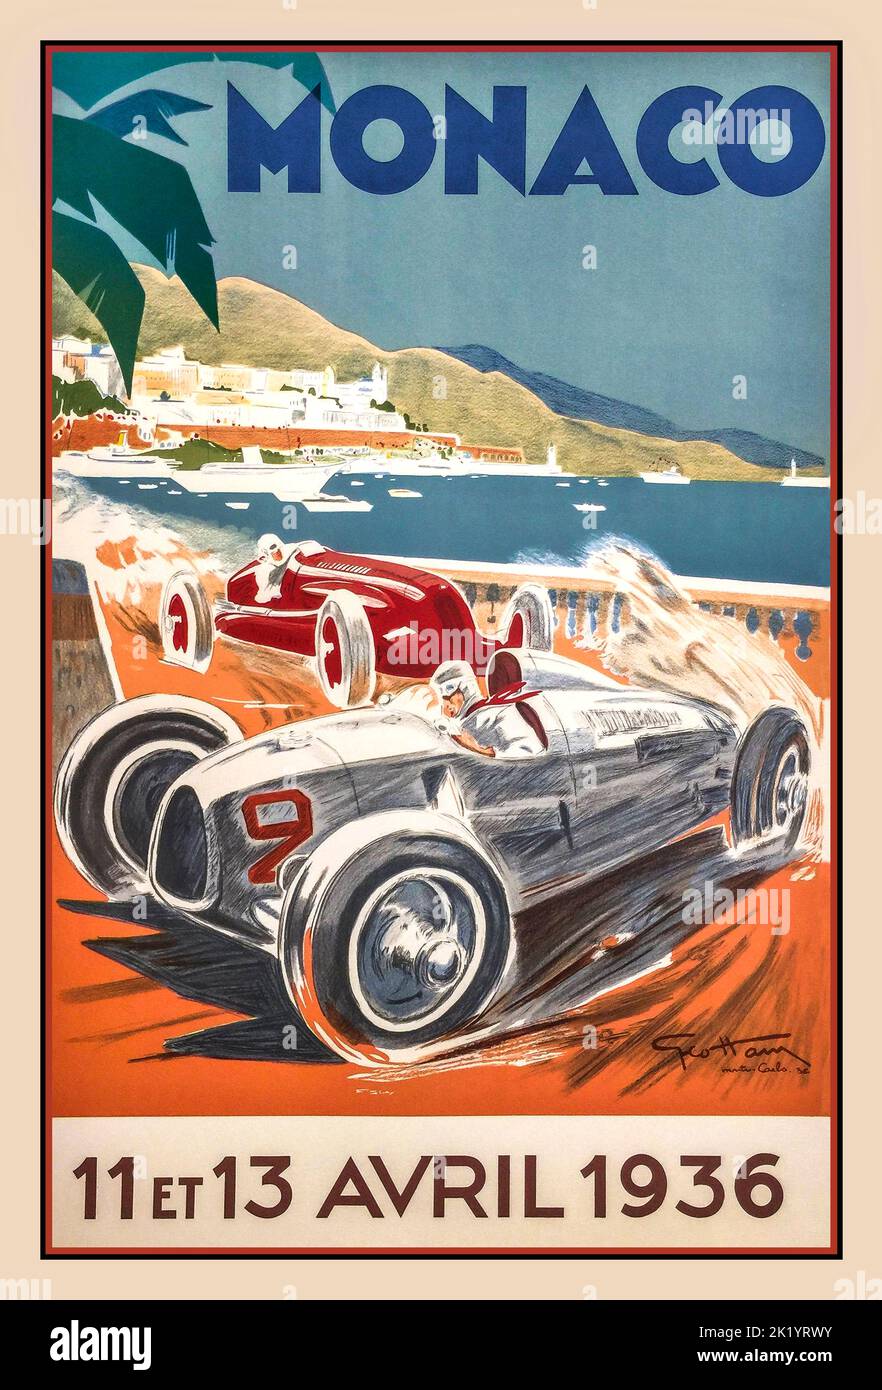 Monaco Grand Prix Vintage 1936: Poster for the Monaco Grand Prix motor race  The 1934 Monaco Grand Prix (formally the VI Grand Prix de Monaco) was a Grand Prix motor race held on 2 April 1934 at Circuit de Monaco in and out of Monte Carlo.  The race was won by Guy Moll, a newly recruited Algerian of Scuderia Ferrari, driving an Alfa Romeo Tipo B/P3 Stock Photo